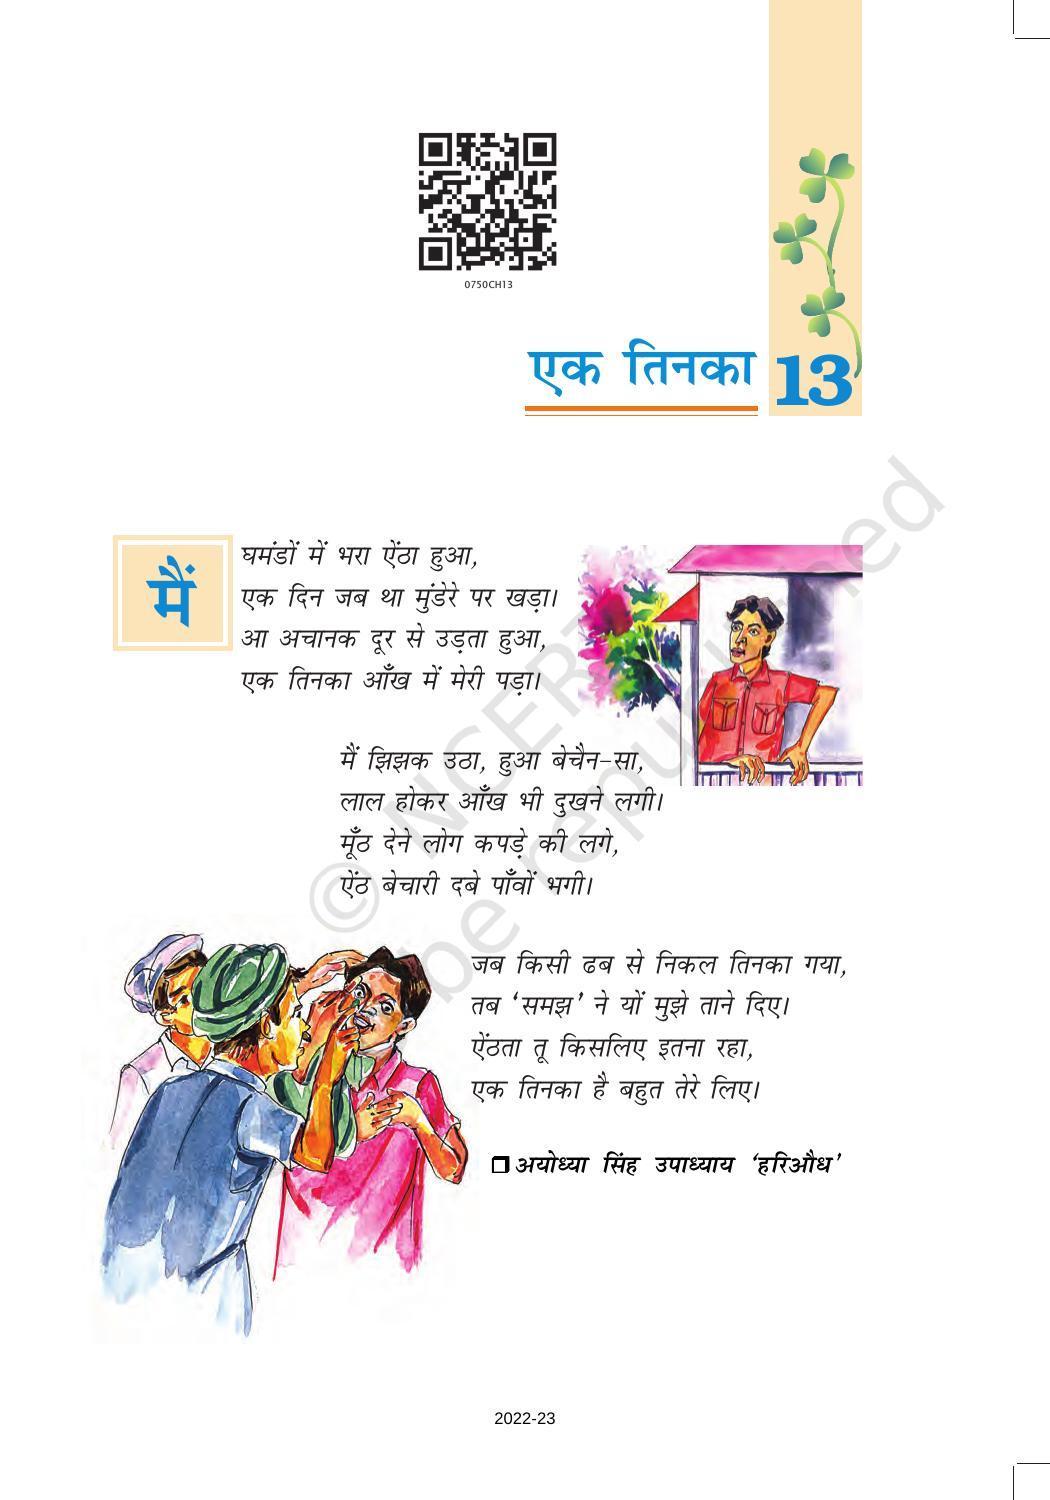 NCERT Book for Class 7 Hindi Vasant Chapter 13 एक तिनका (कविता) - Page 1